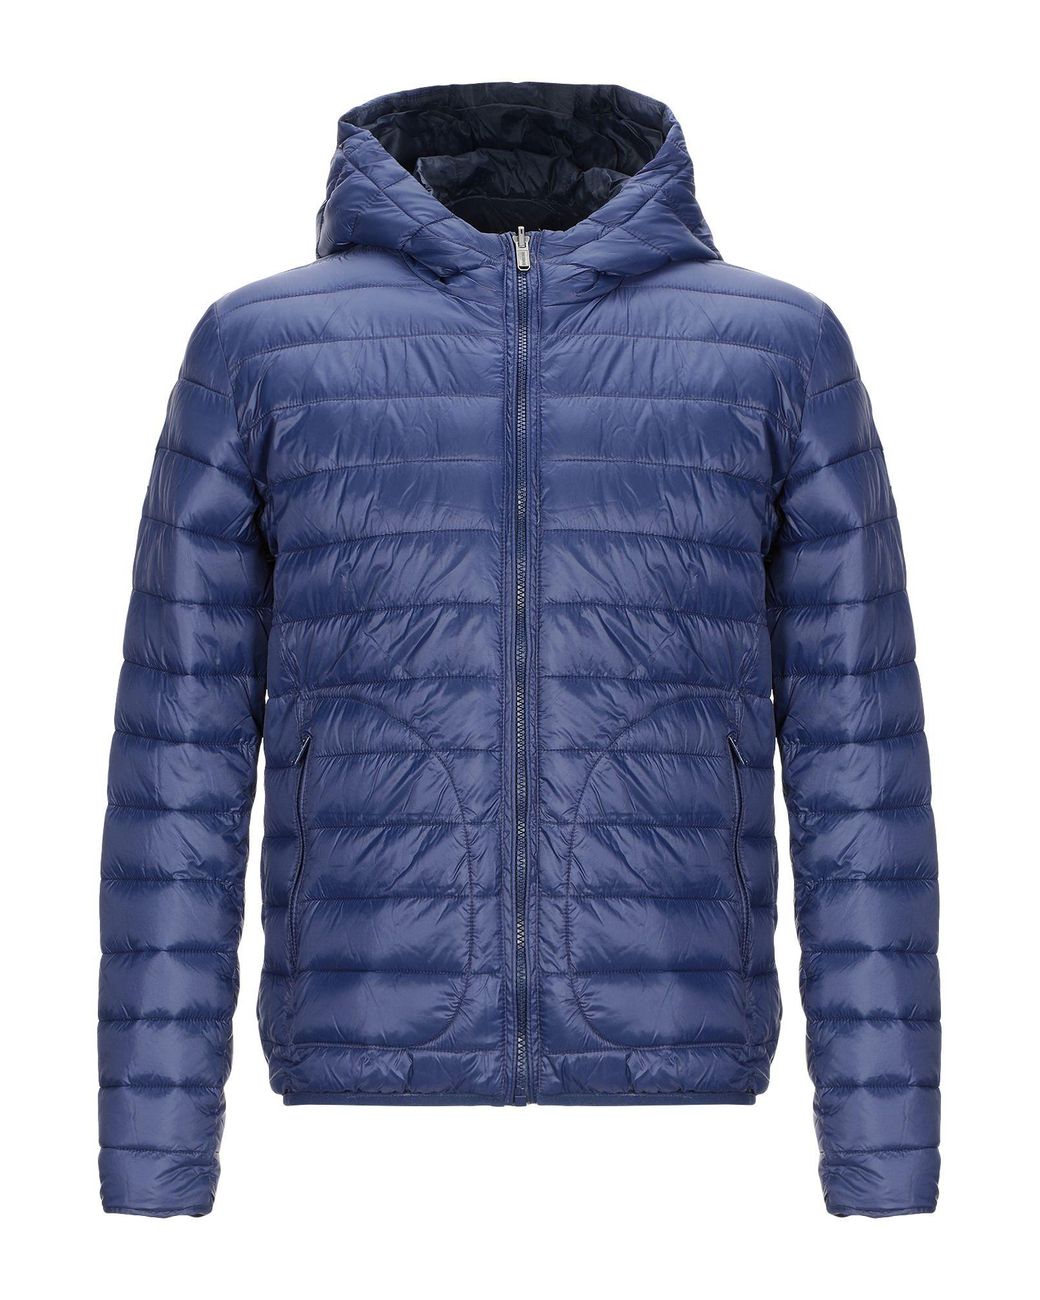 Bomboogie Synthetic Down Jacket in Blue for Men - Lyst